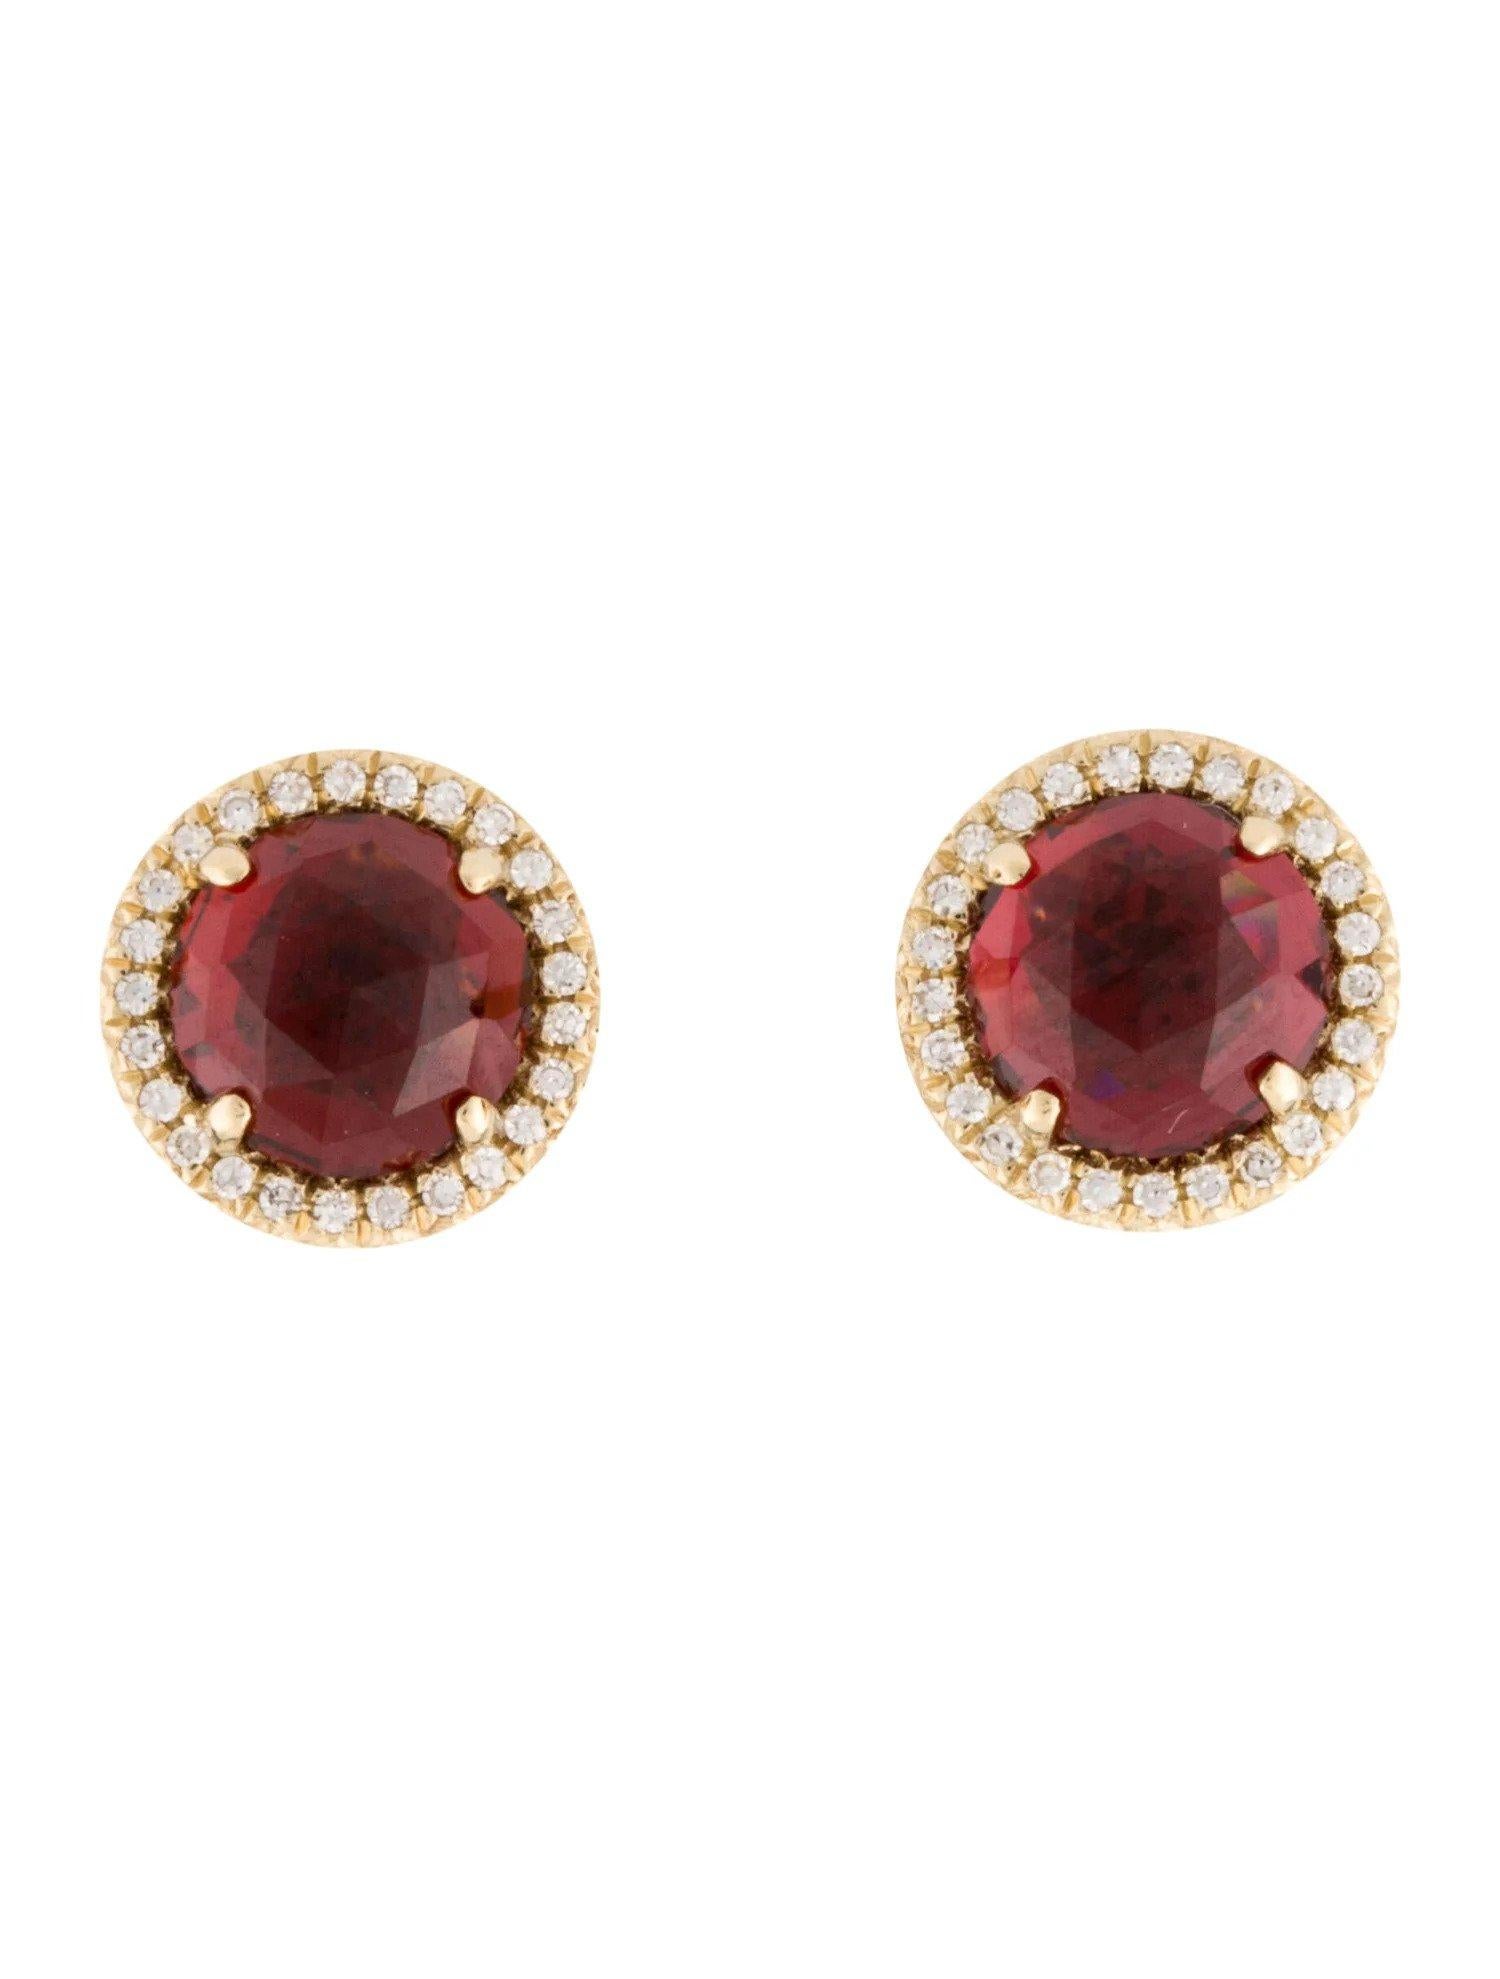 These Garnet & Diamond Earrings are a stunning and timeless accessory that can add a touch of glamour and sophistication to any outfit. 

These earrings each feature a 1.50 Carat Round Garnet , with a Diamond Halo comprised of 0.06 Carats of Single